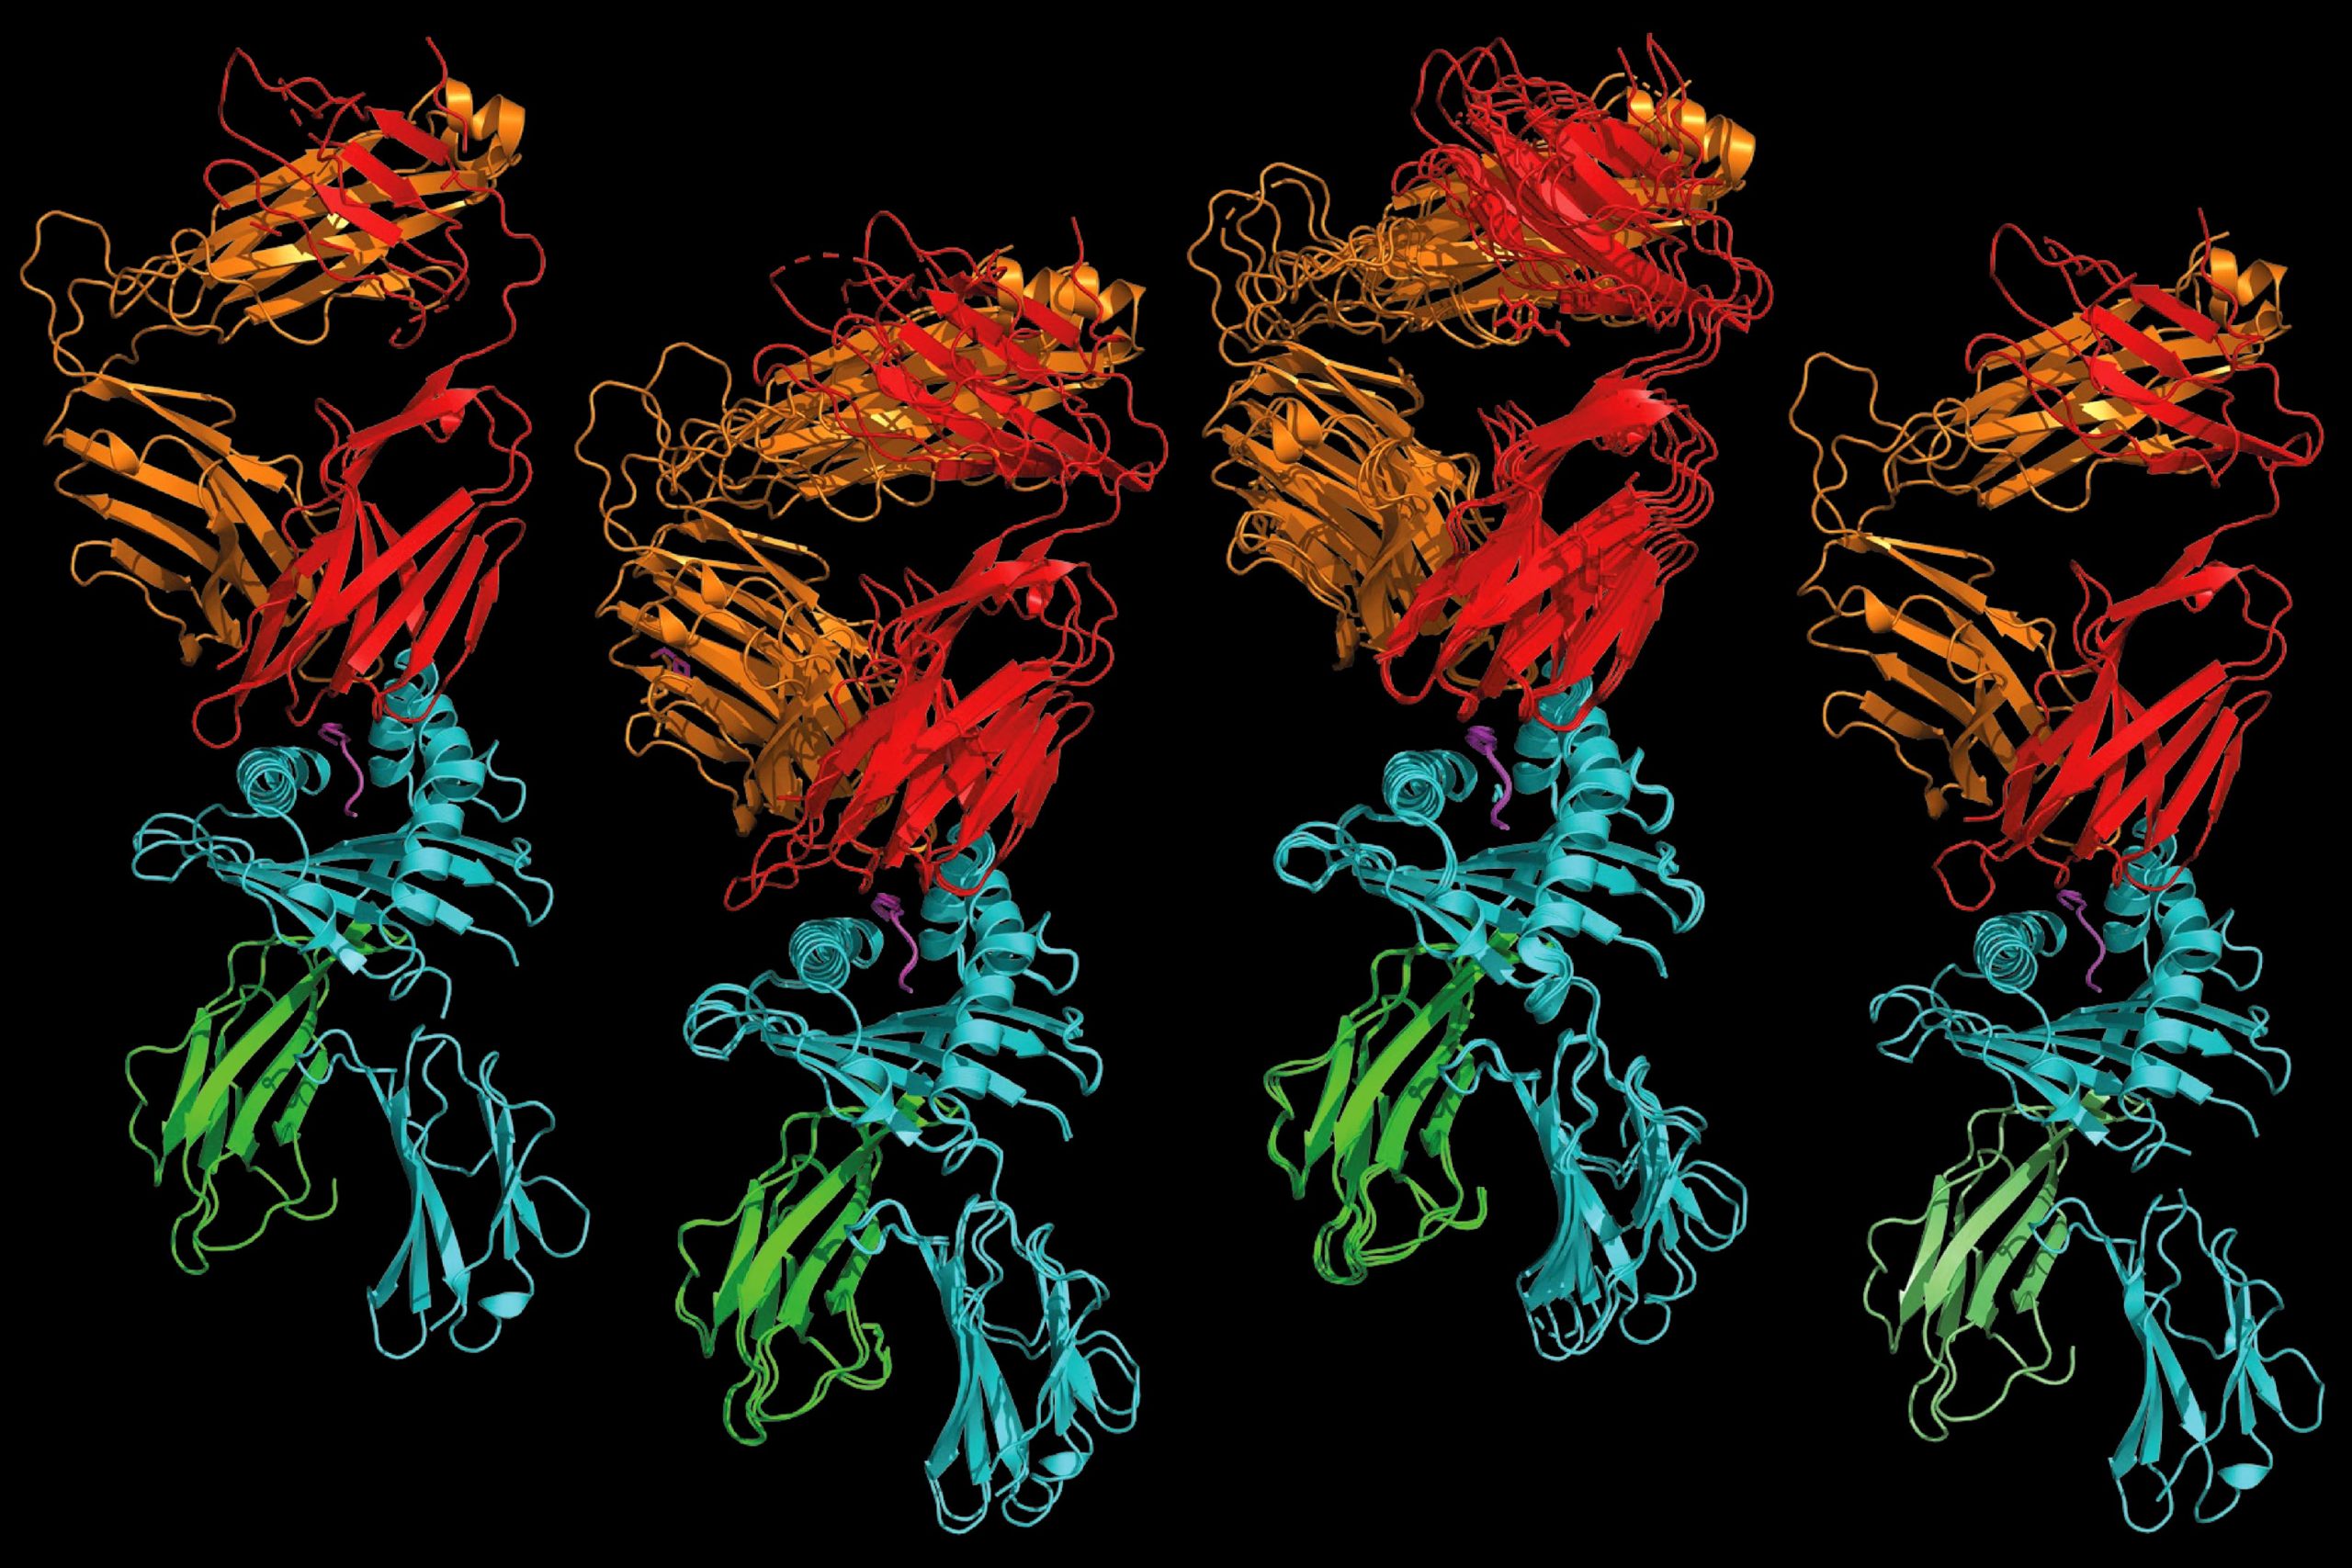 Cracking the Code of Autoimmune Diseases: New Approach Identifies Key Protein Fragments